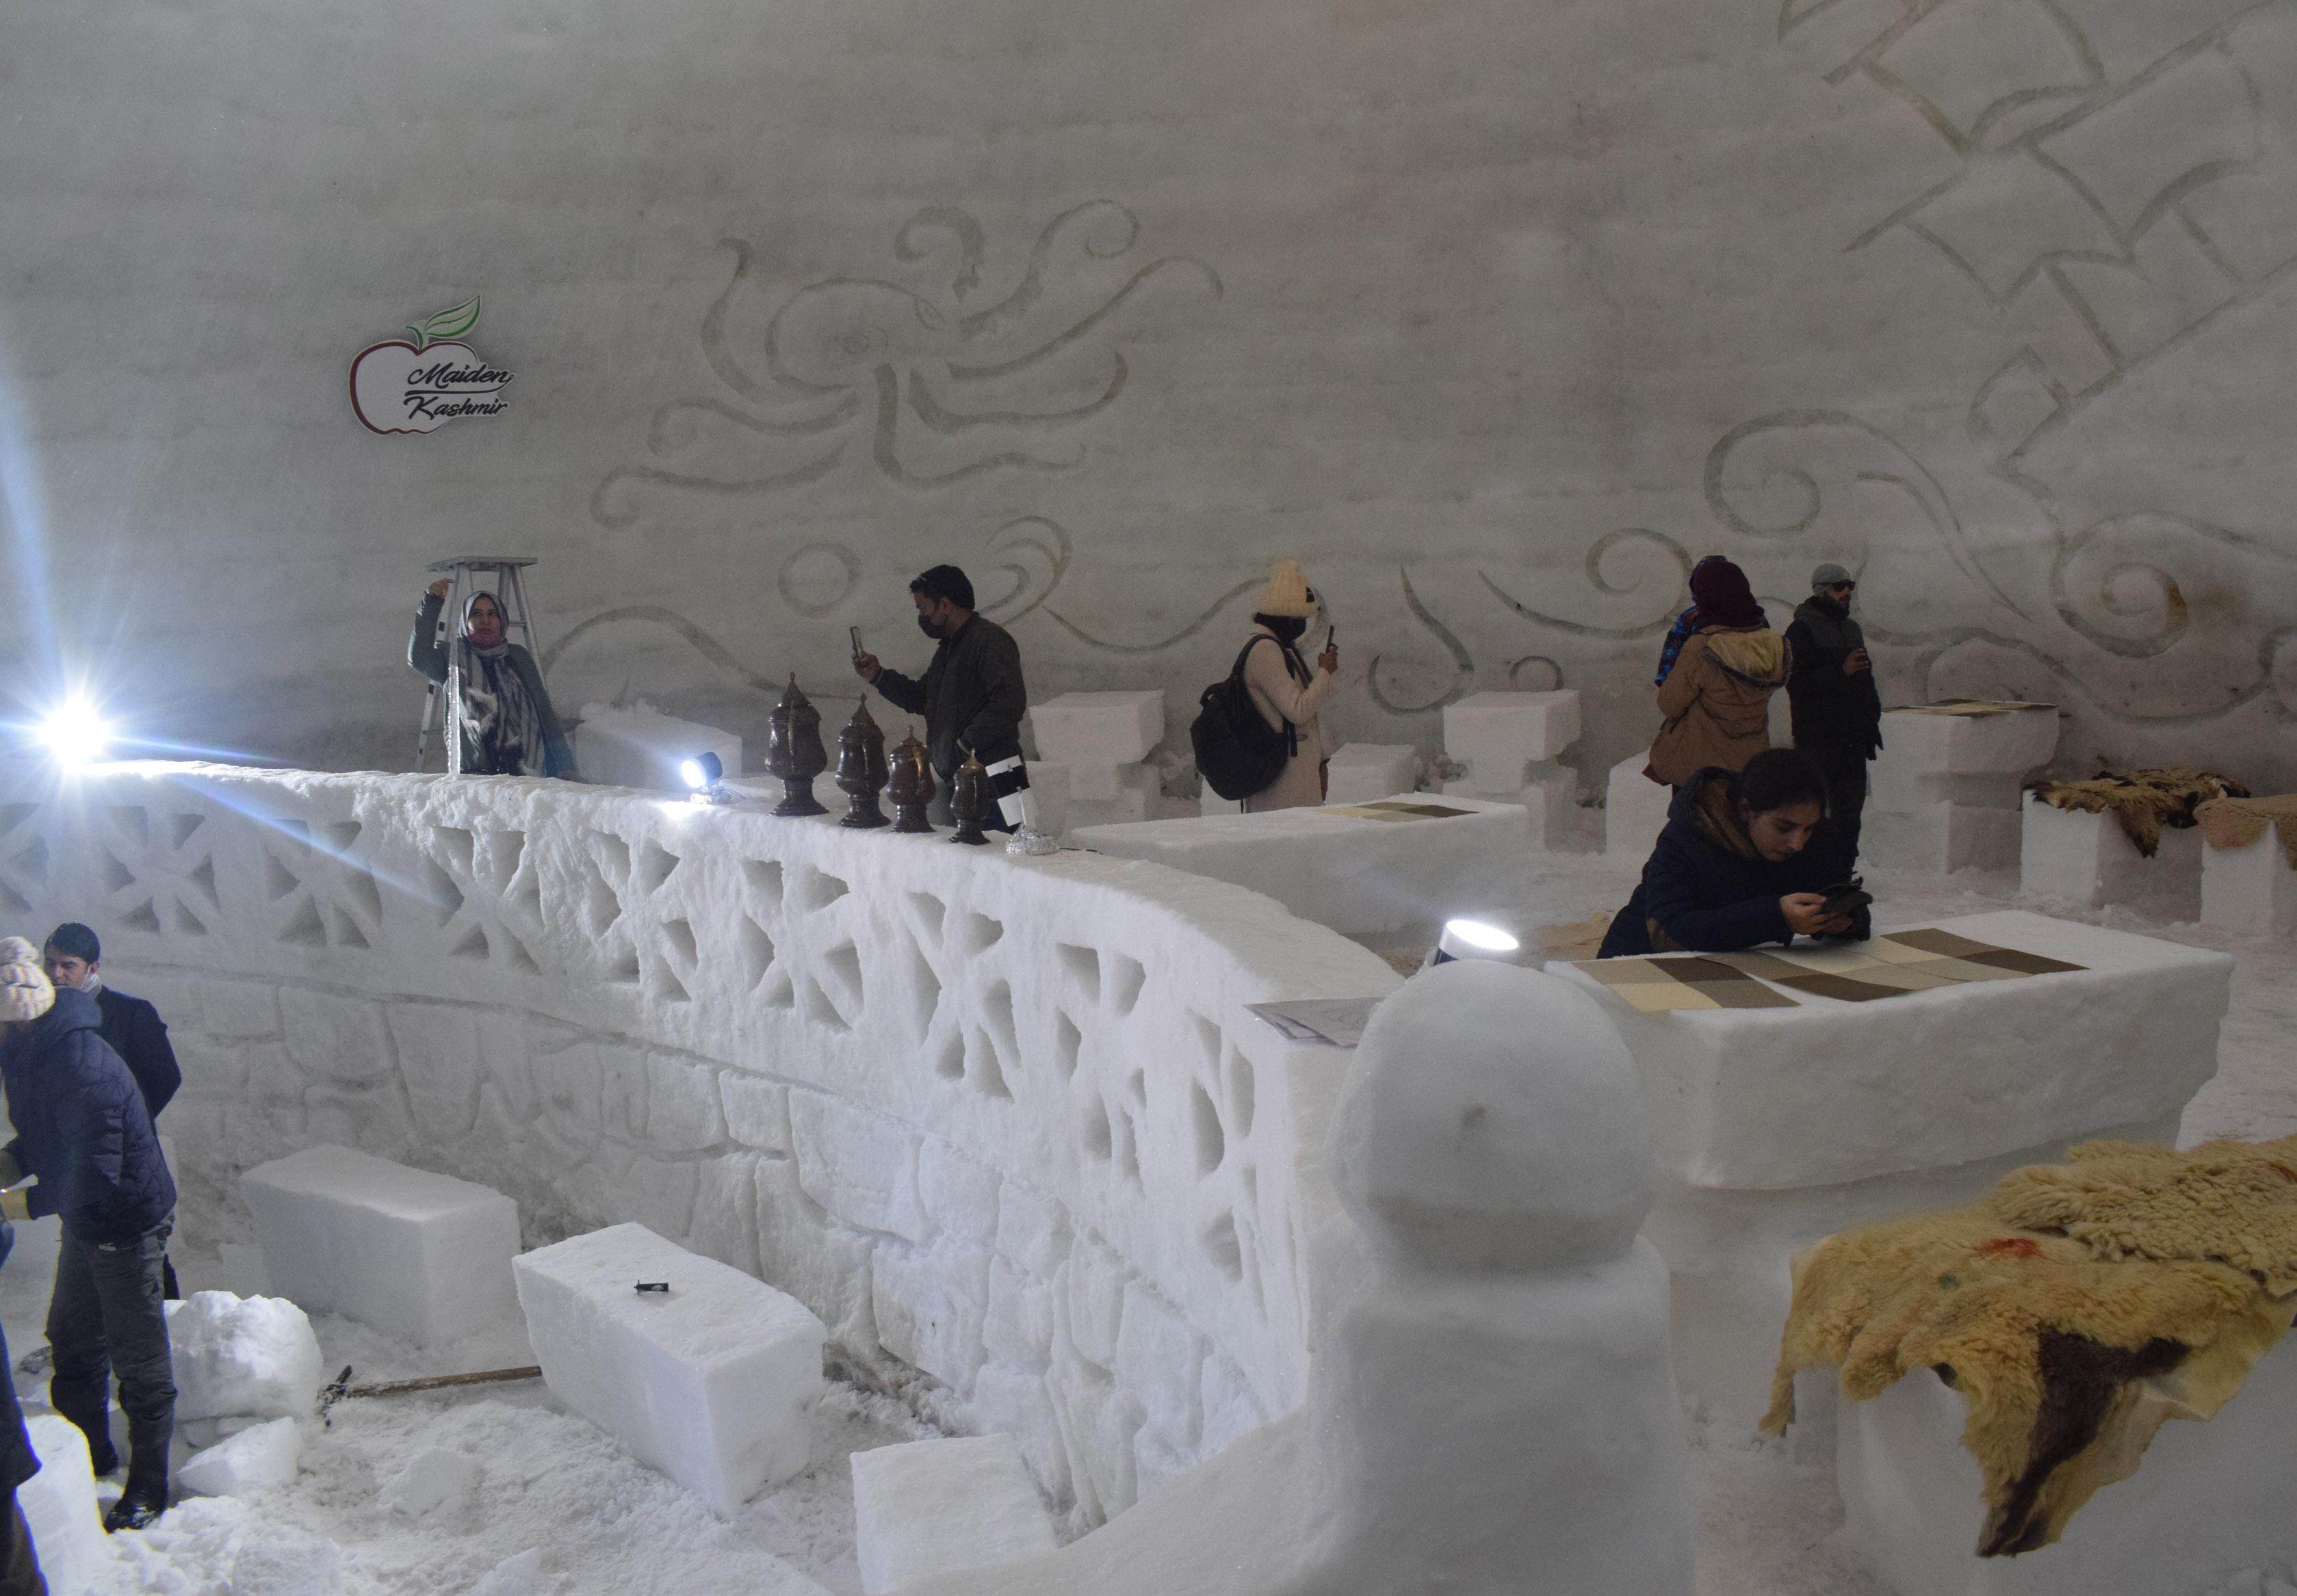 Hotelier Syed Waseem Shah says that it took 64 days to set up the igloo